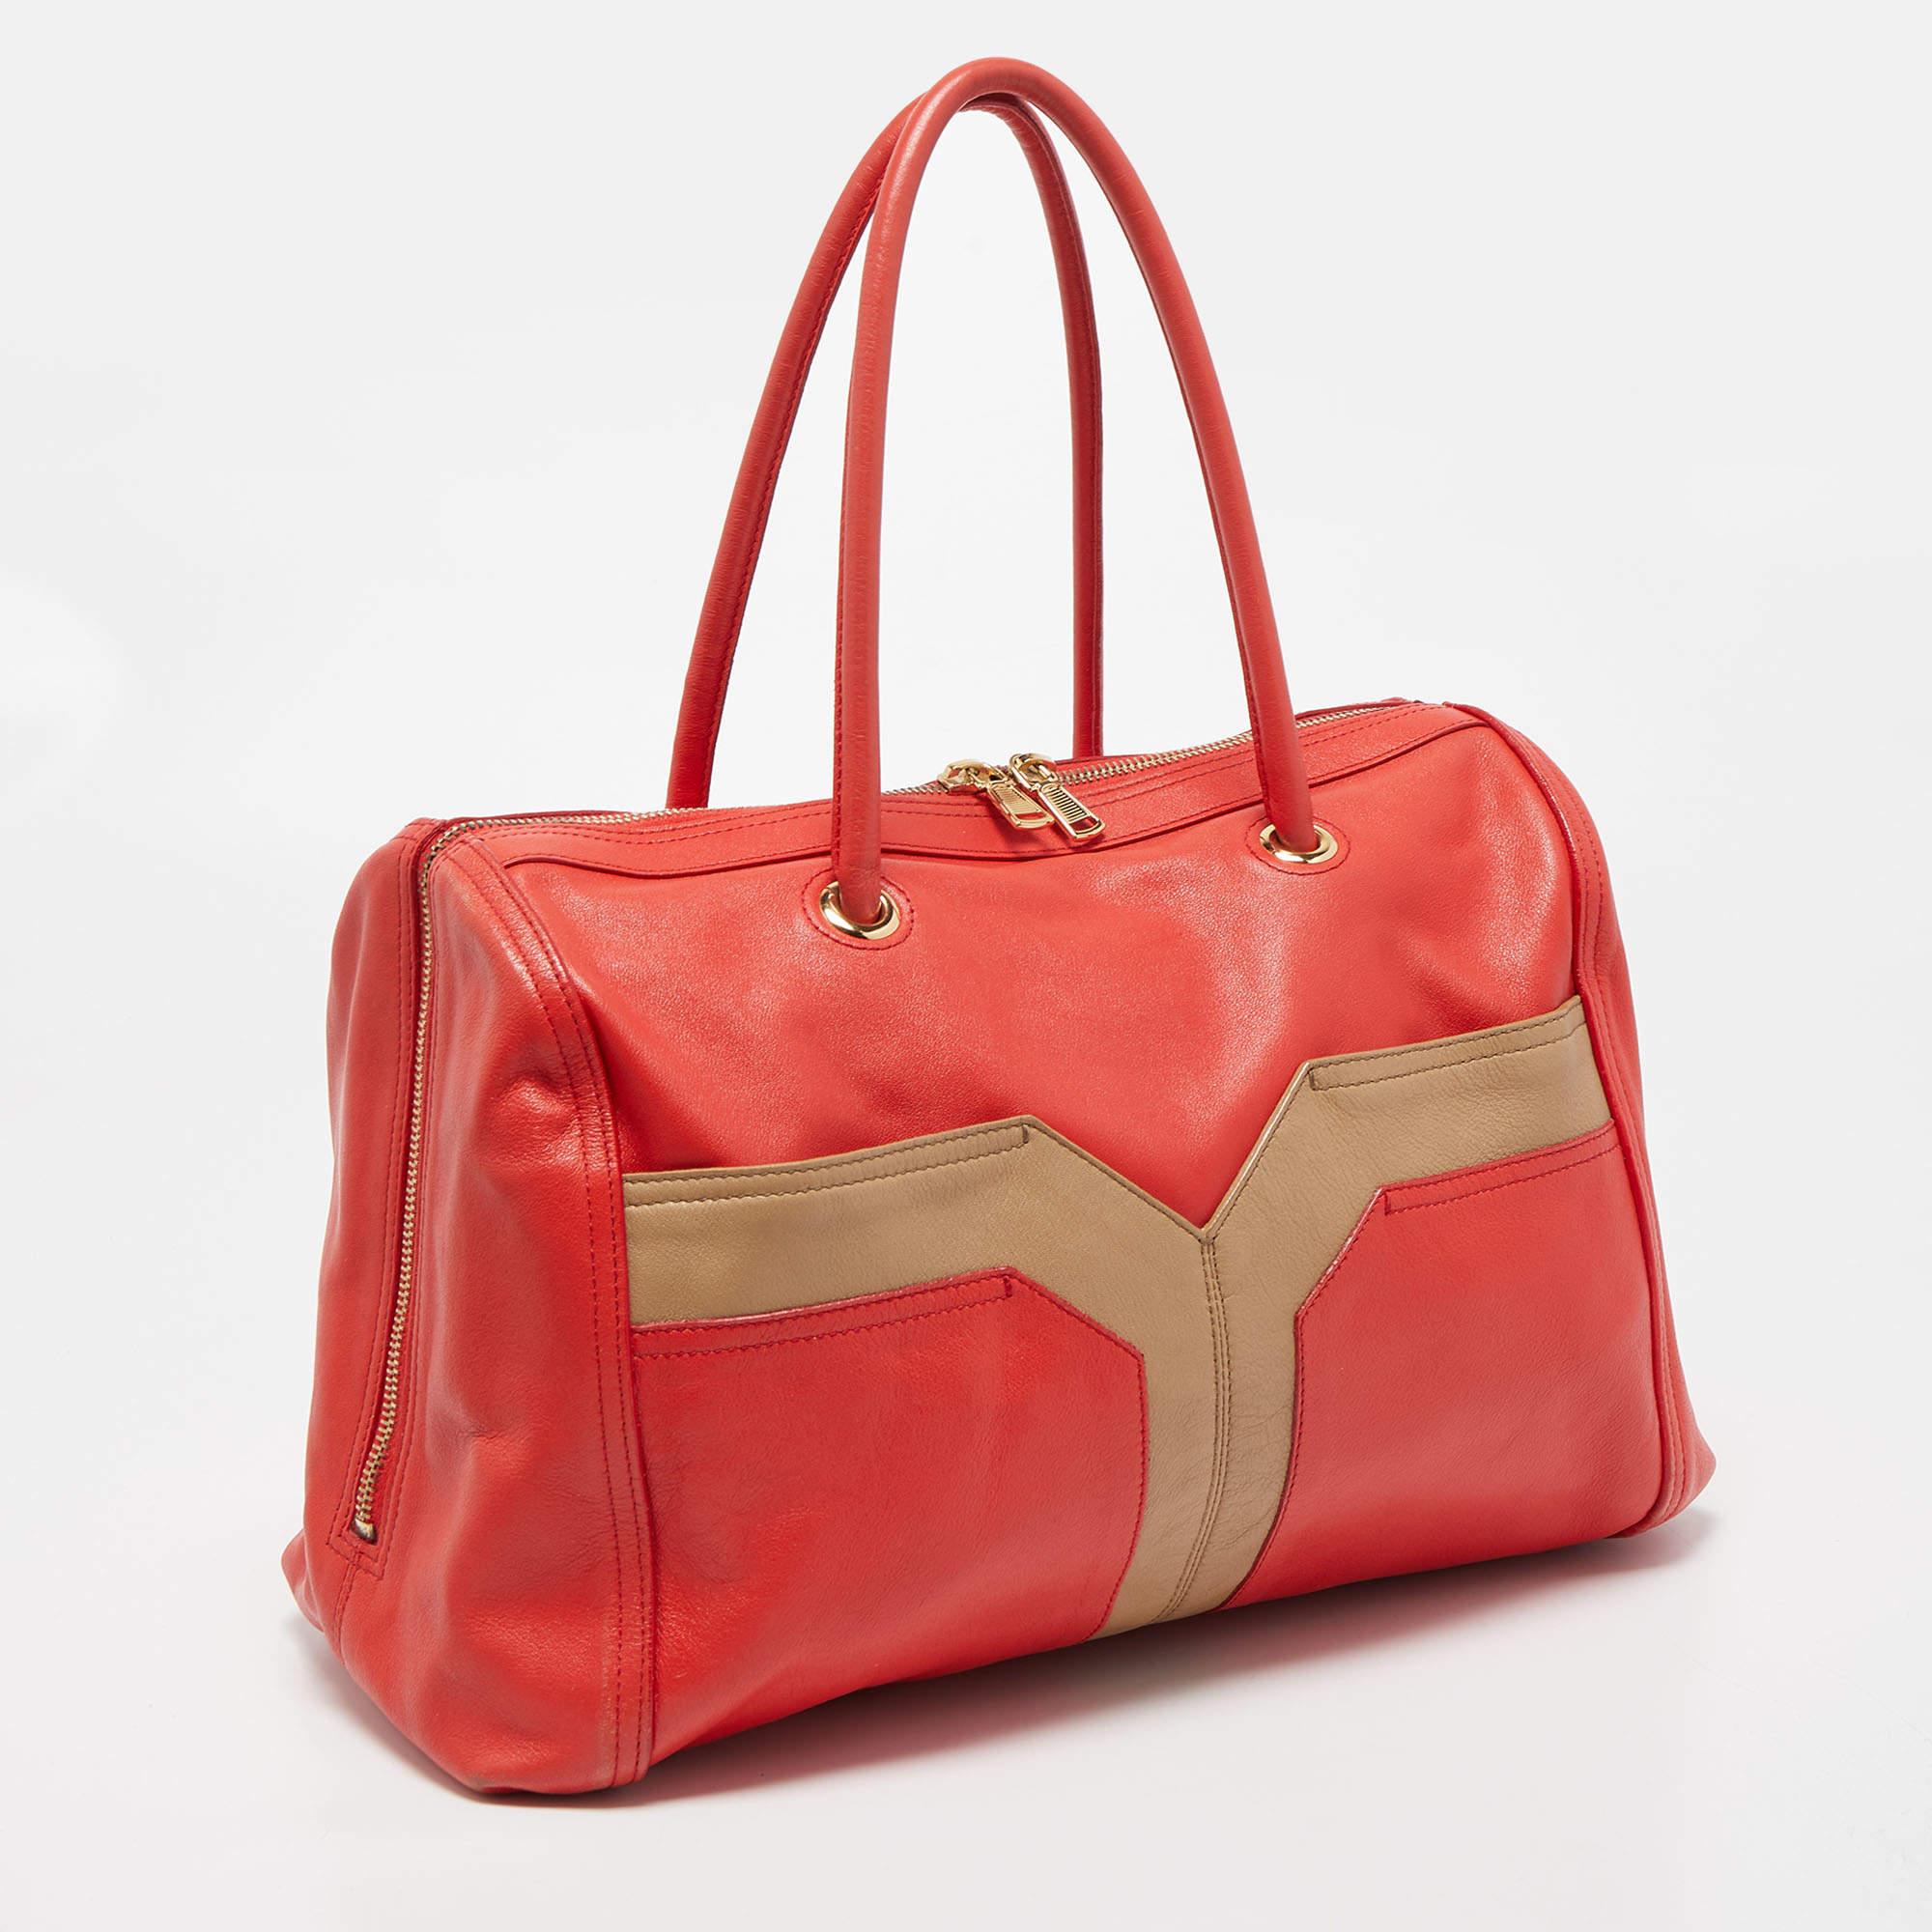 Yves Saint Laurent Red/Beige Leather Lucky Chyc Bowler Bag In Good Condition In Dubai, Al Qouz 2